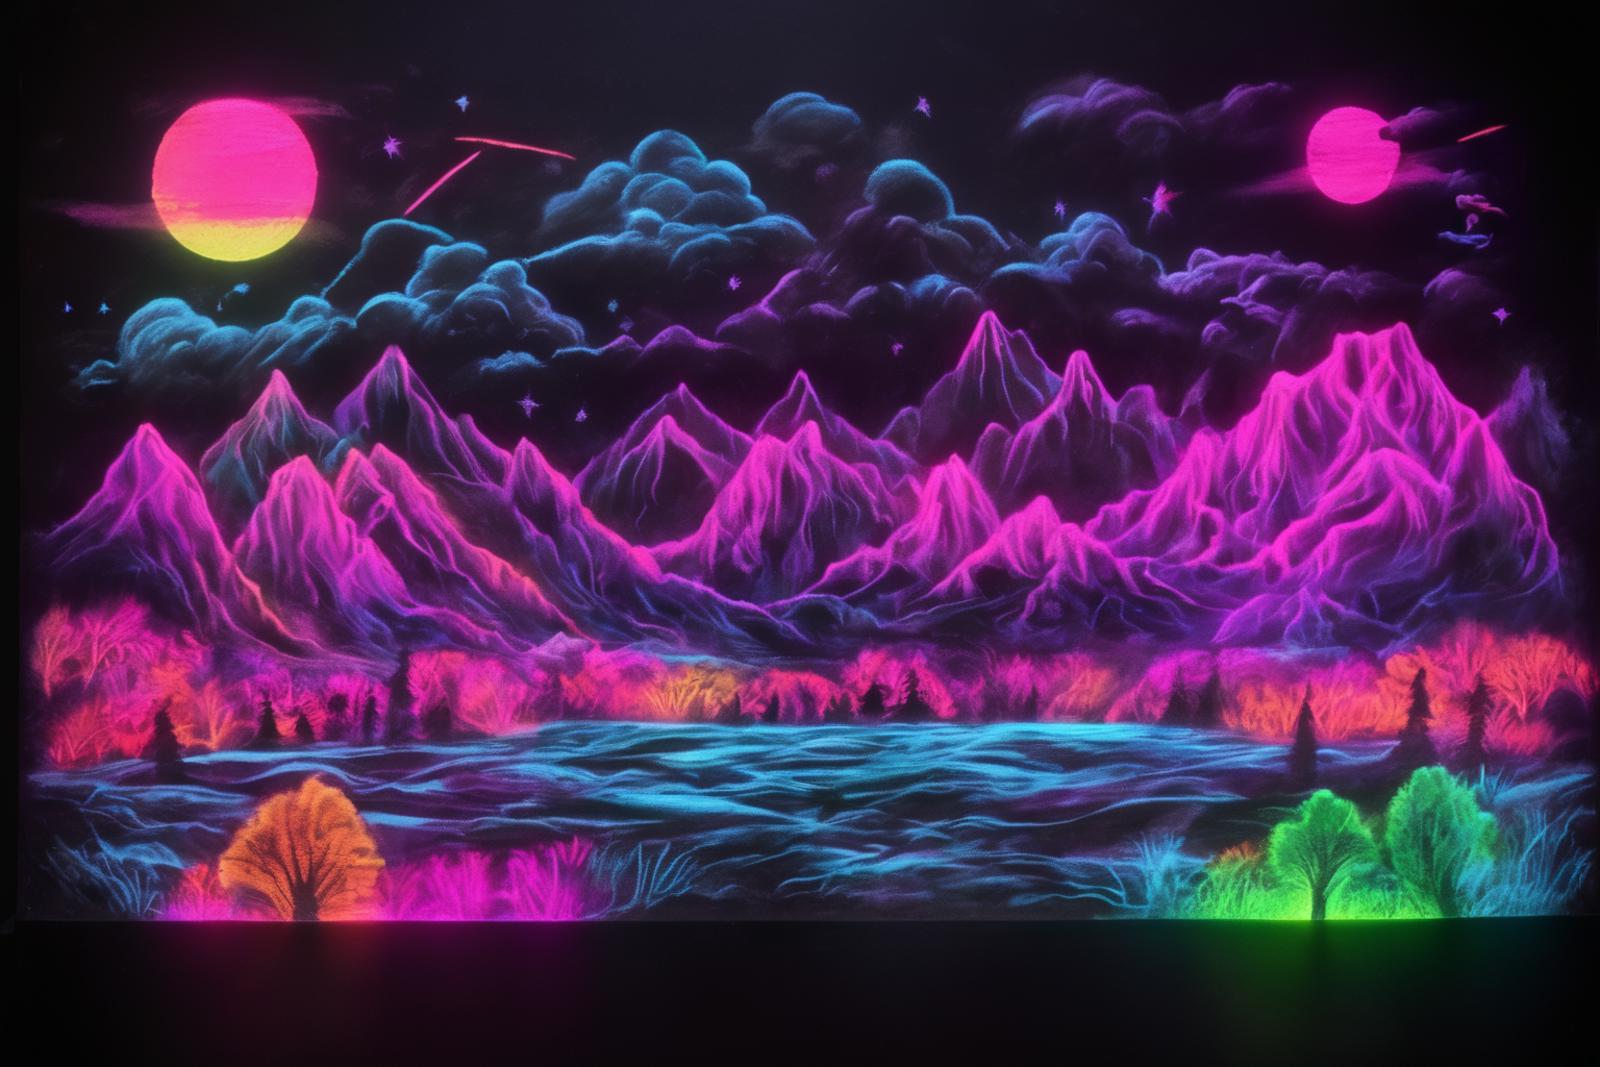 Illustration of a mountain range with pink, blue, and purple hues and a starry sky